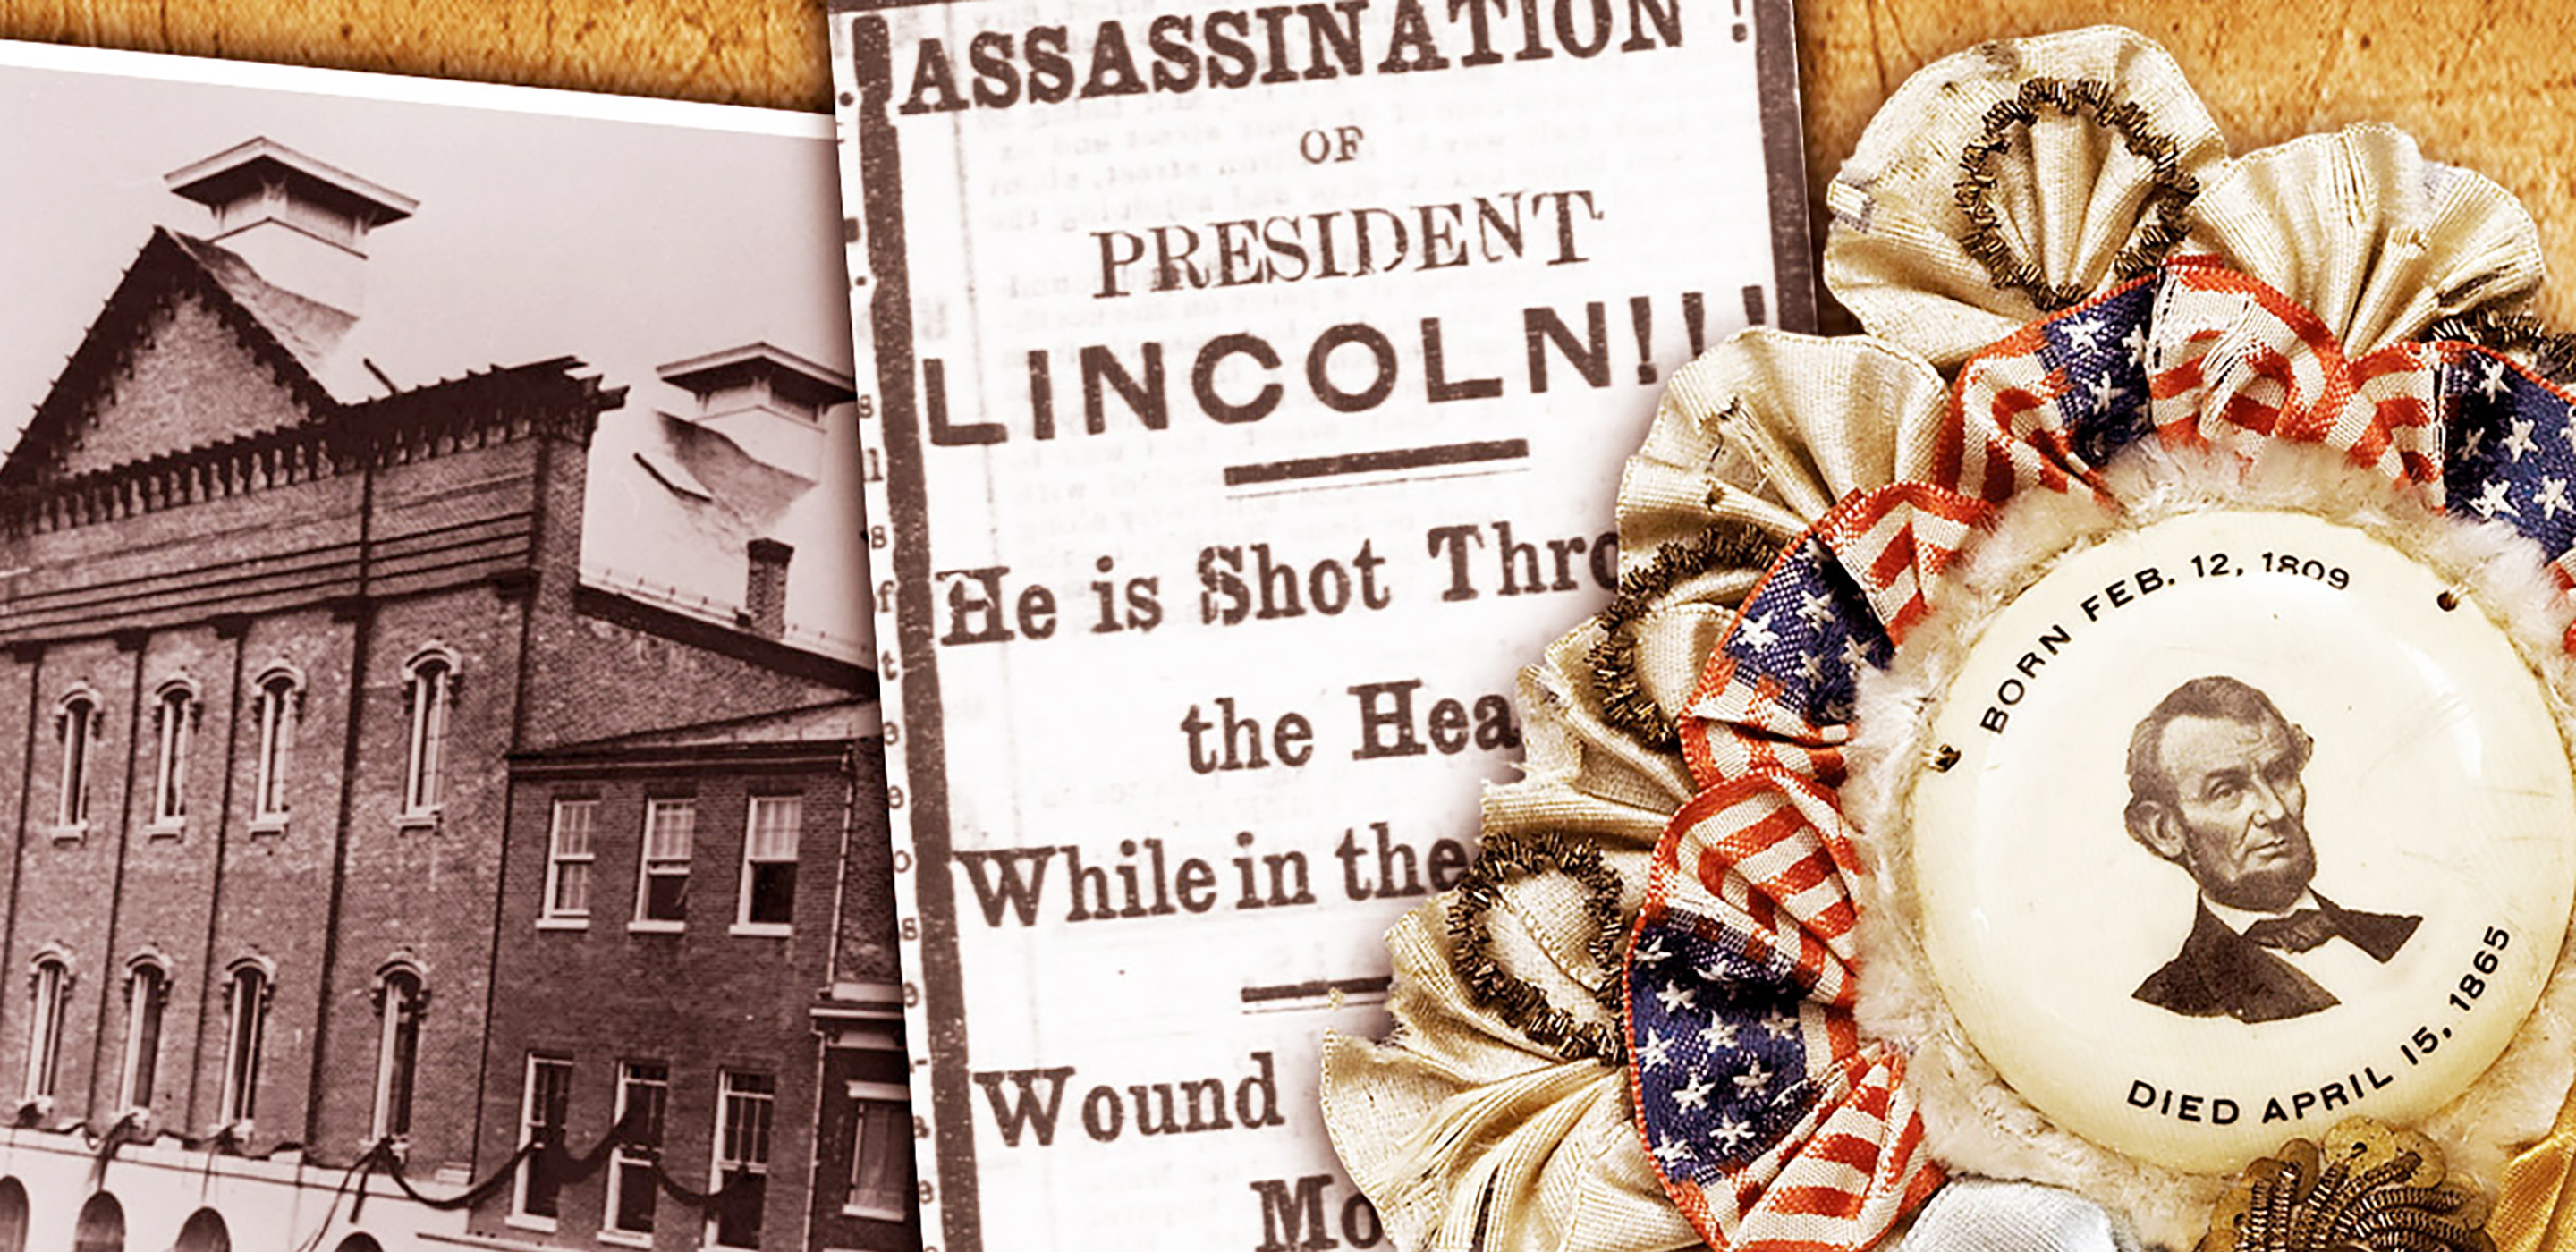 A collage of photographs, newspapers and memorabilia related the death of Abraham Lincoln.